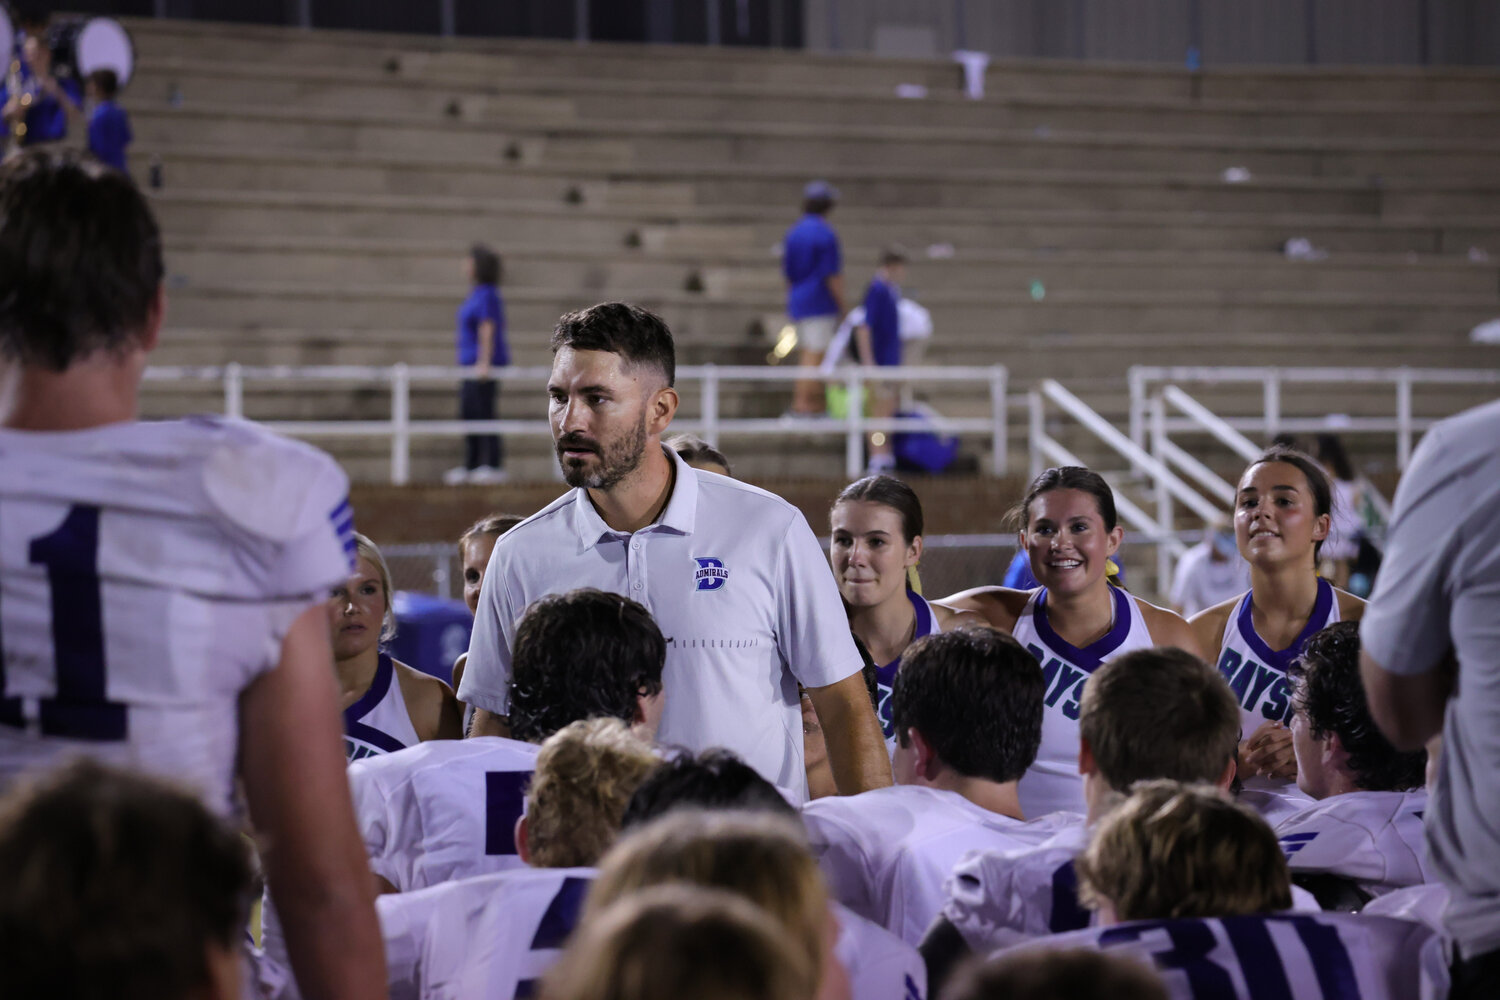 Bayside head football coach, Barrett Trotter, addressing his team post game at the W.C. Majors Field in Fairhope Sep. 7. Trotter told his team he is proud of them and that they don't quit.